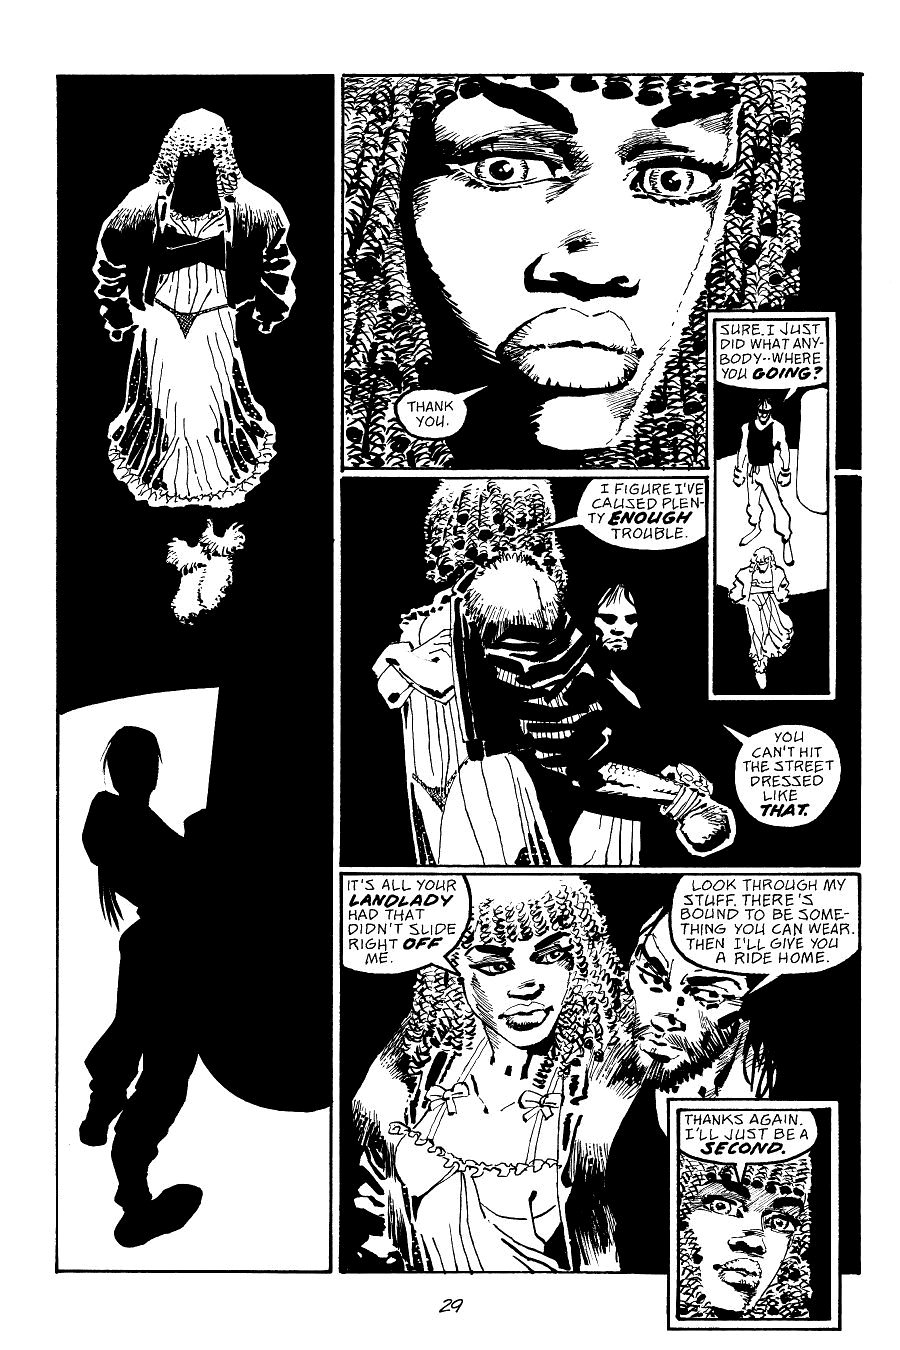 page 29 of sin city 7 hell and back